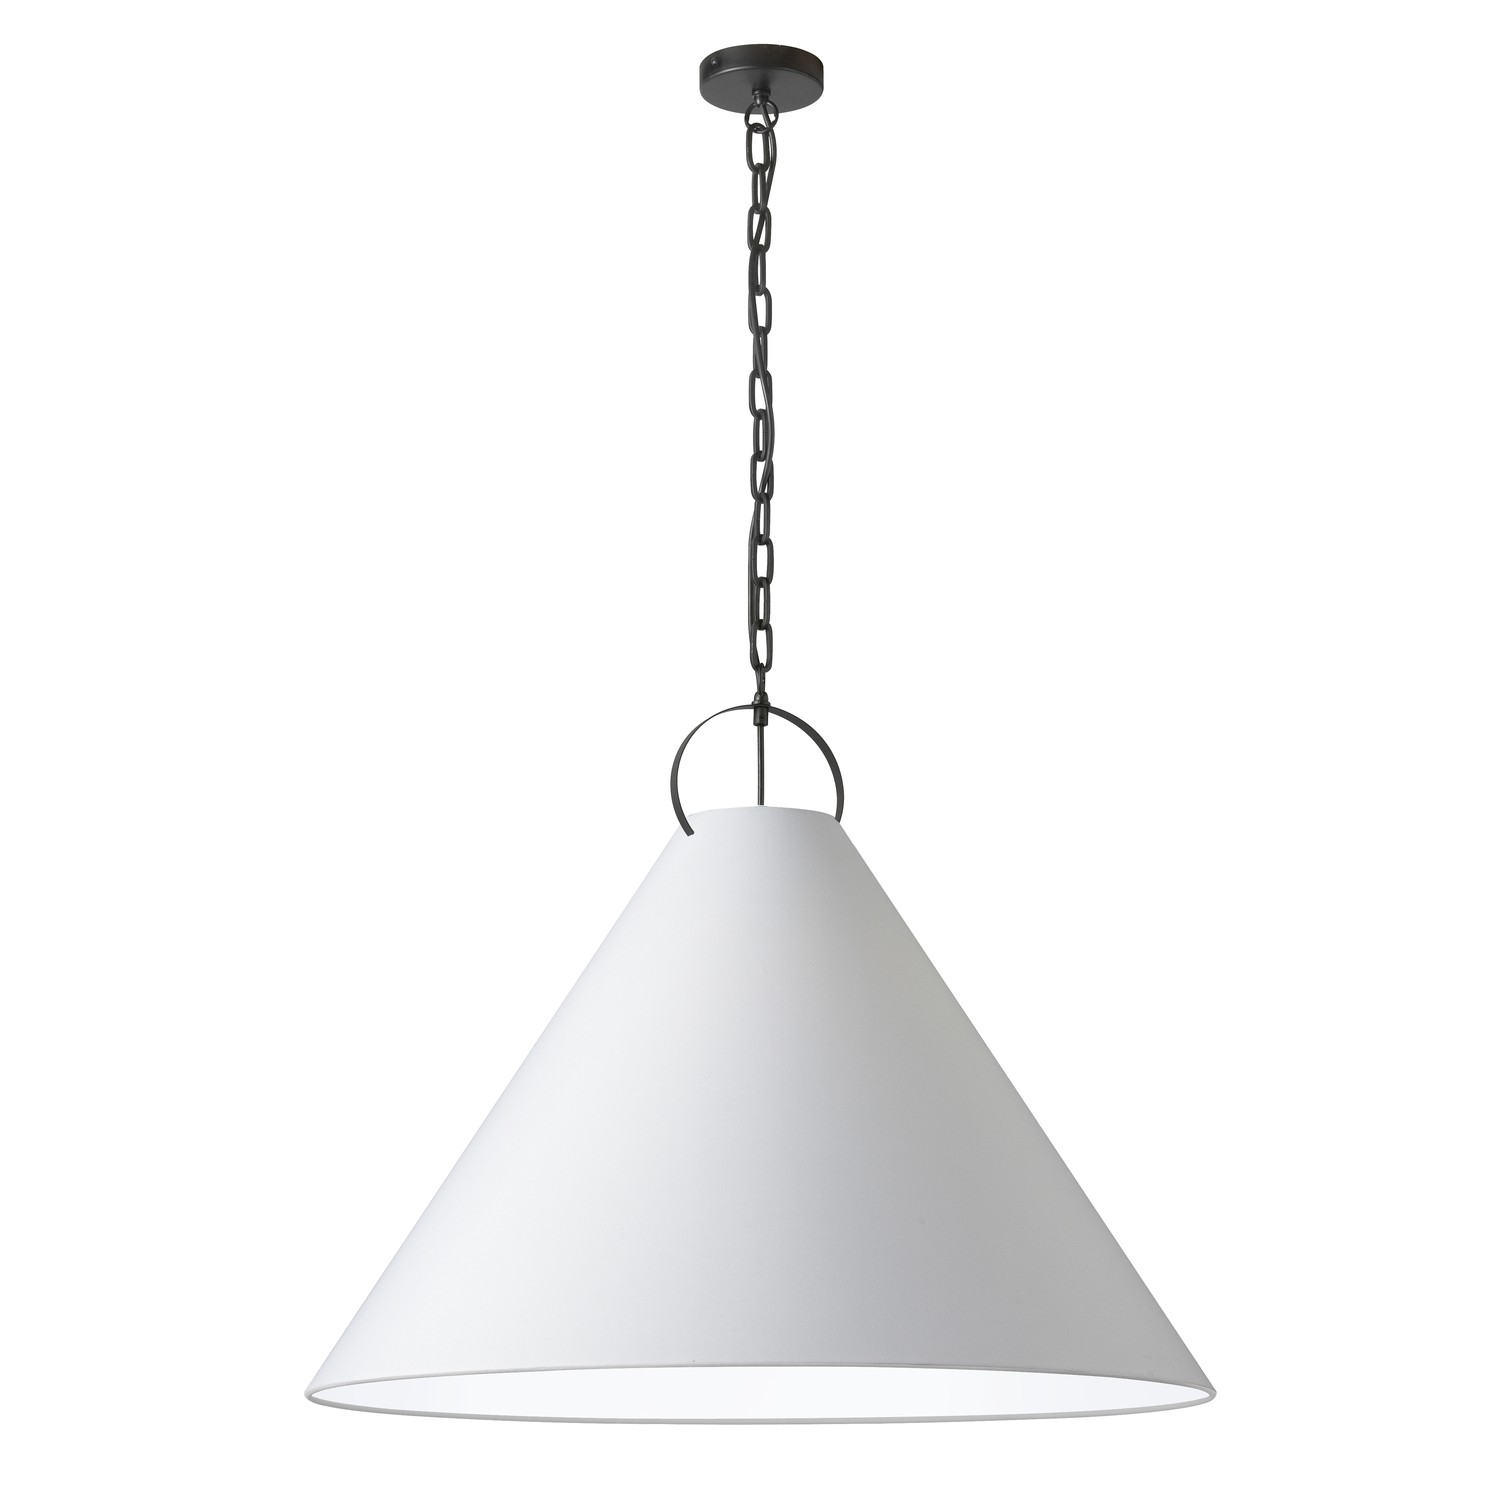 1 Light Incandescent Pendant, Matte Black with White Shade